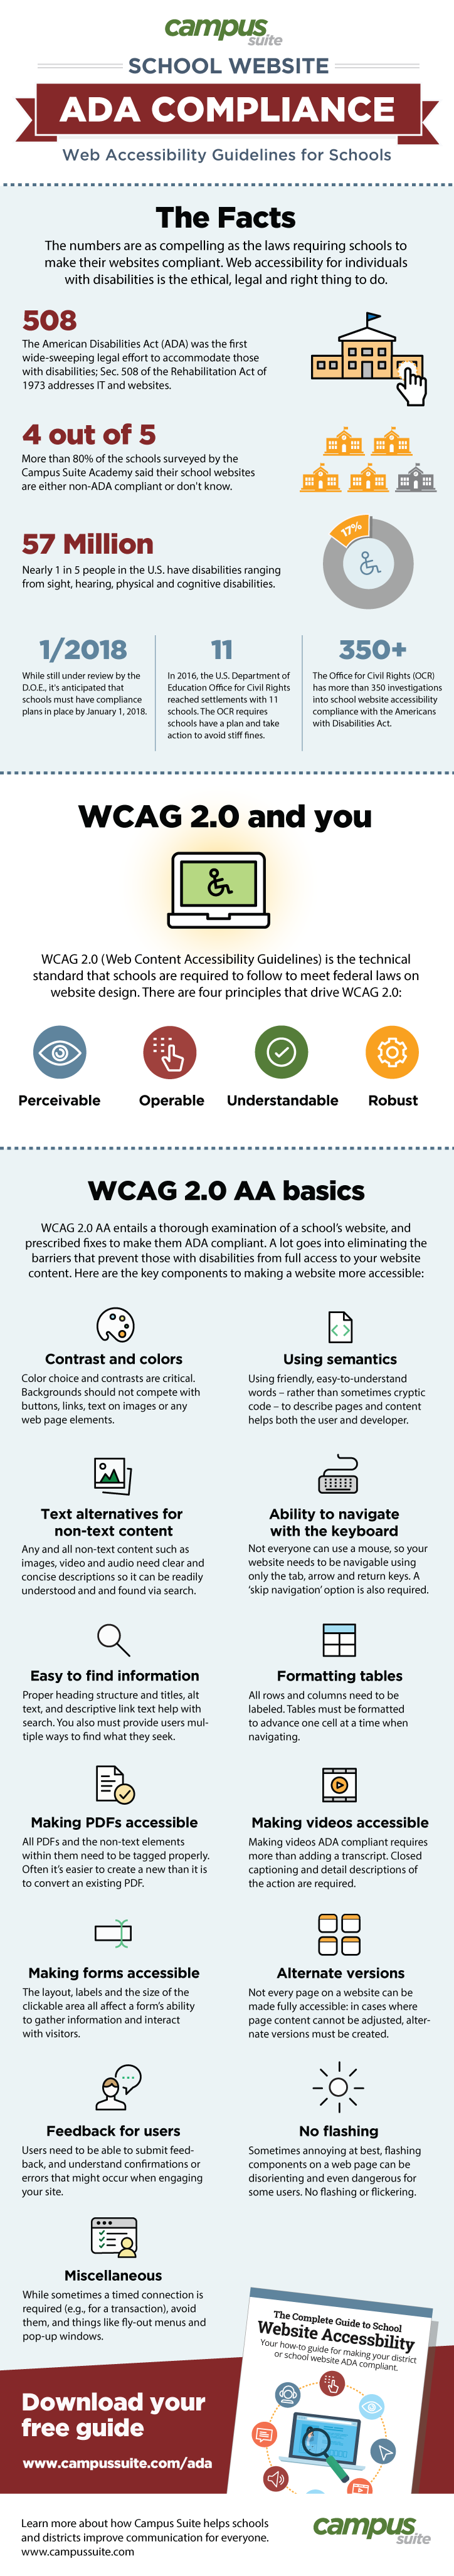 School Website Accessibility ADA Compliance Infographic